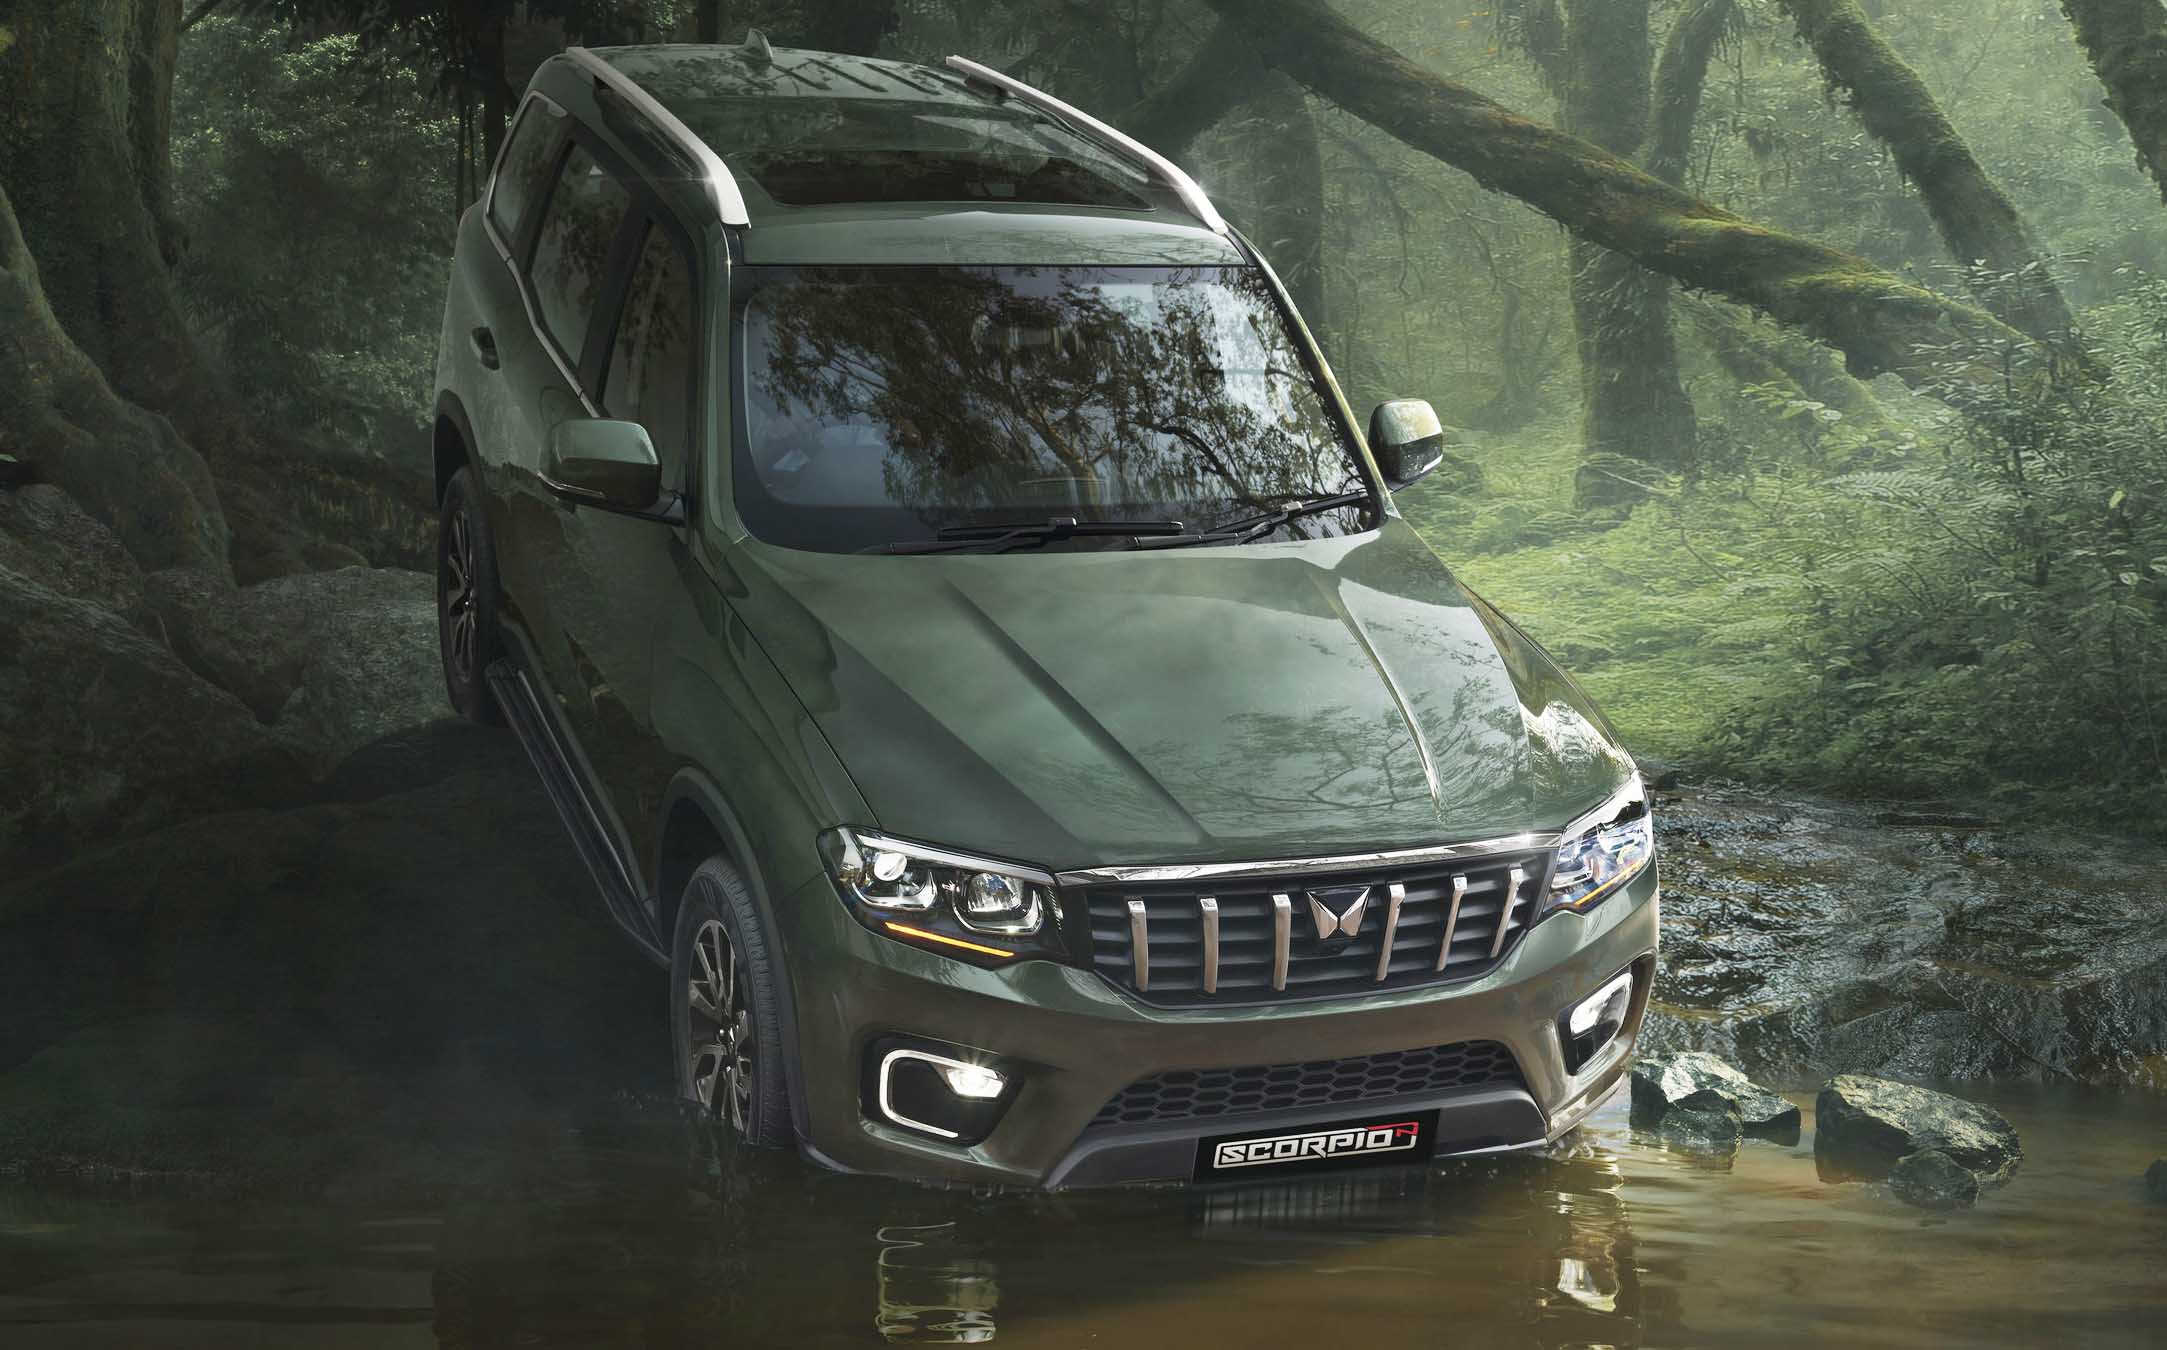 The new SUV Scorpio will hit the market from June 27 for Mahindra fans